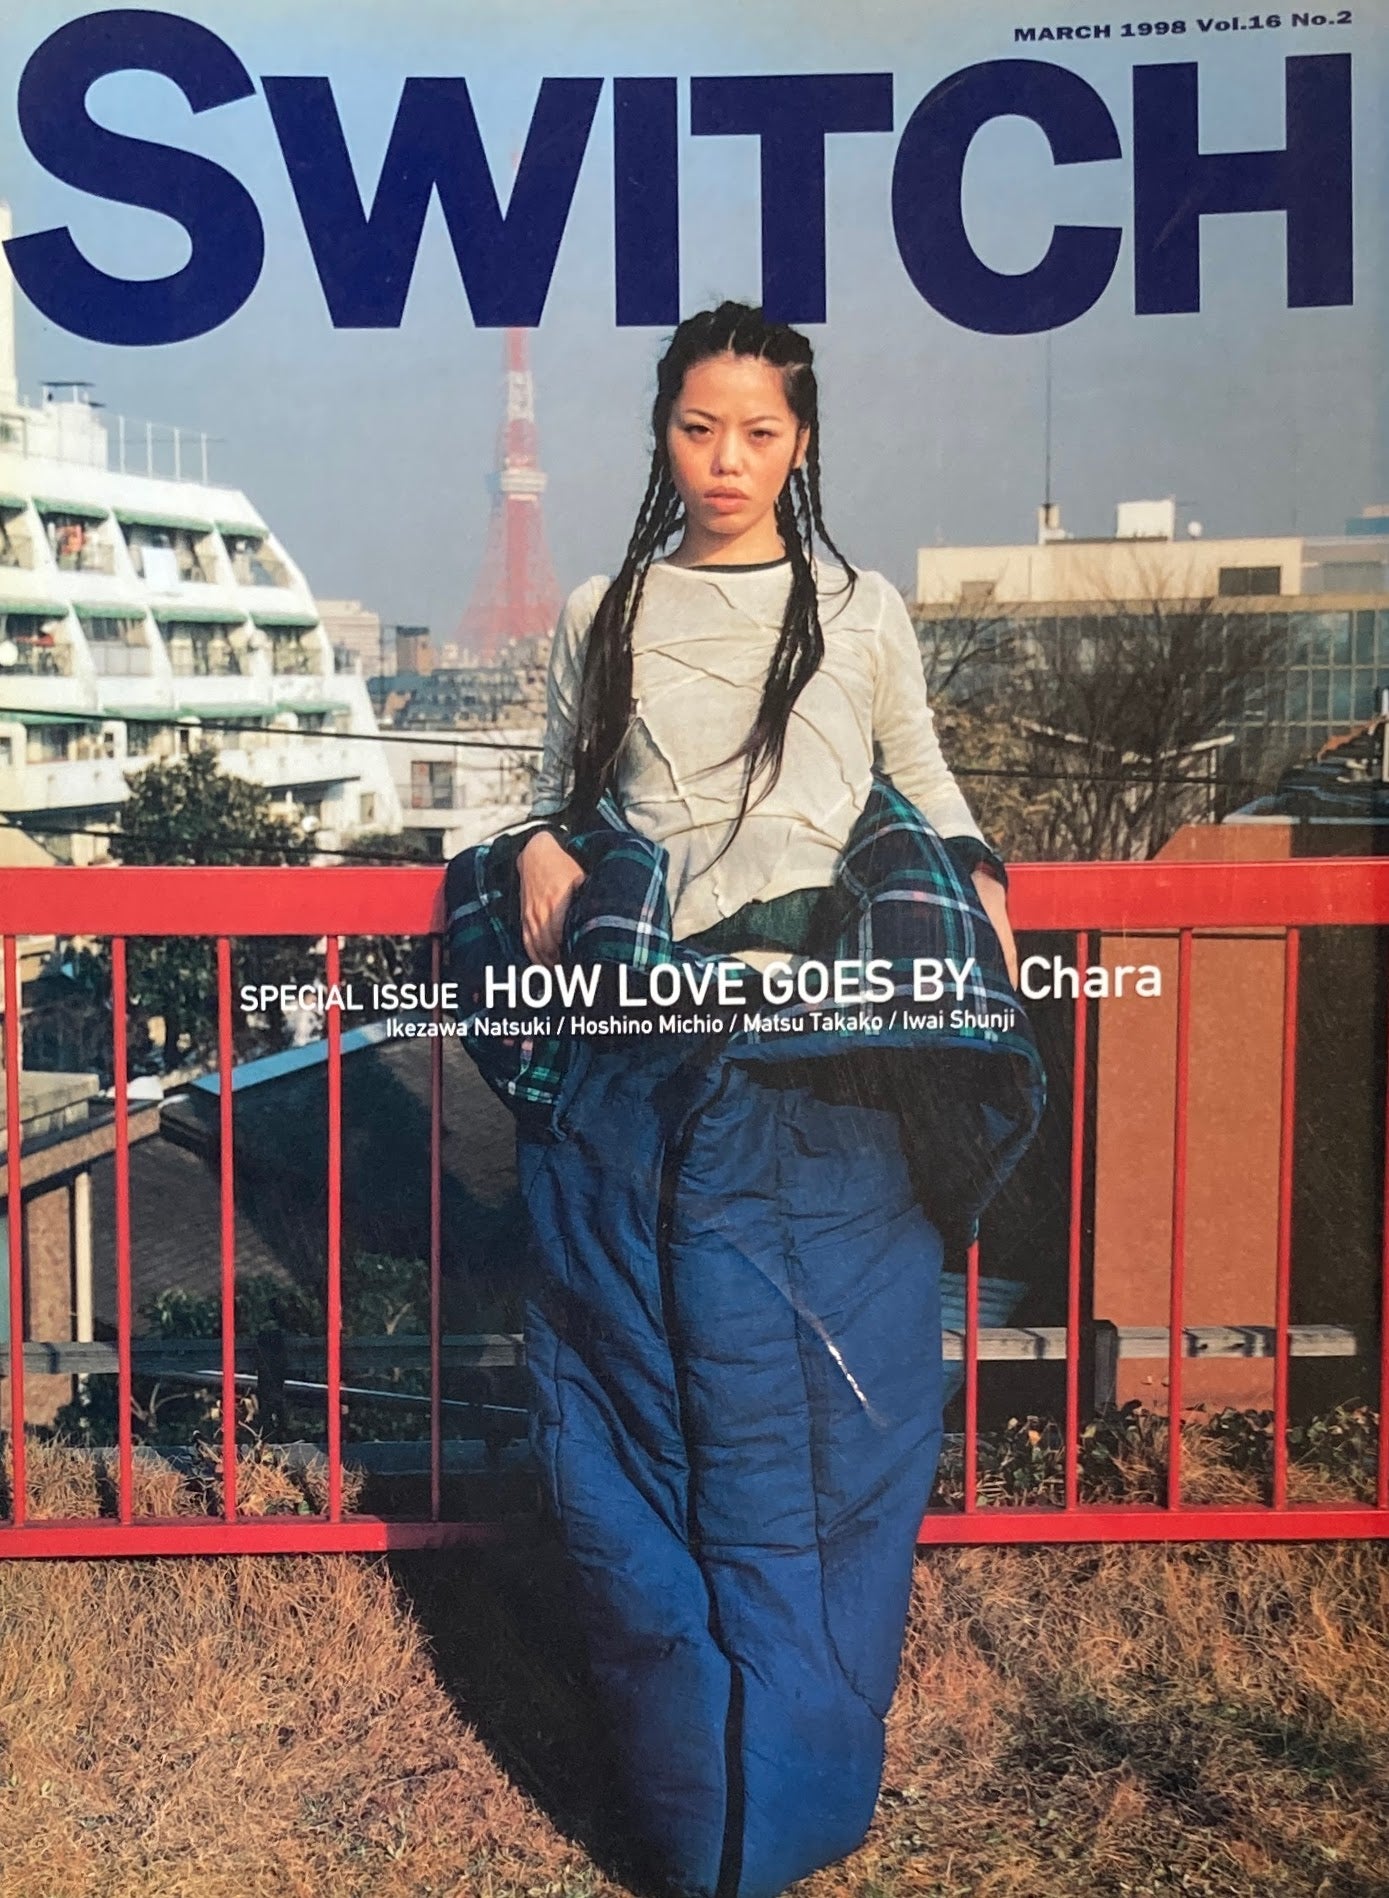 SWITCH　Vol.16　No.2　MARCH 1998　HOW LOVE GOES BY Chara